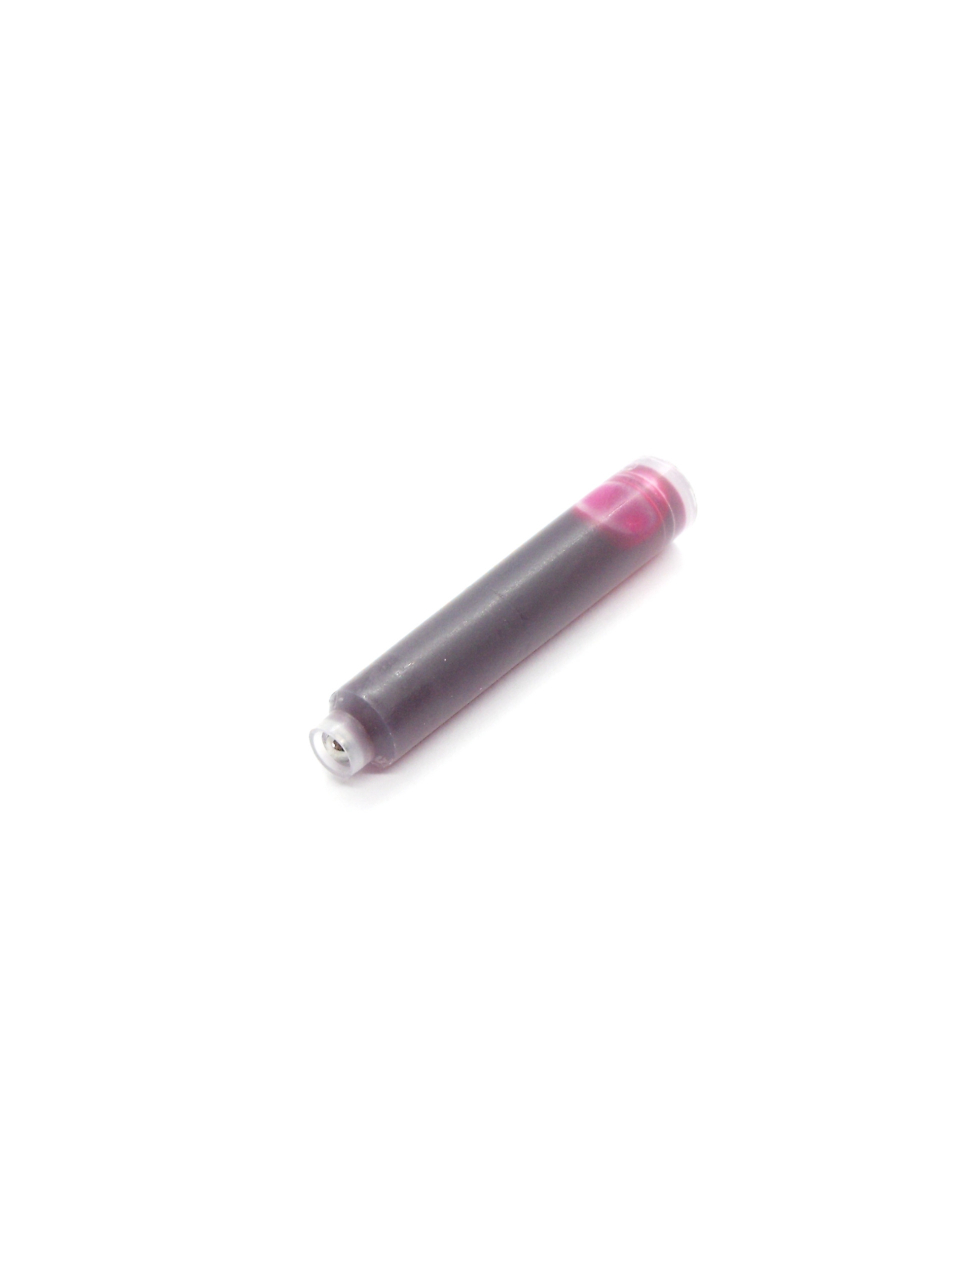 Cartridges For Franklin Covey Fountain Pens (Pink)